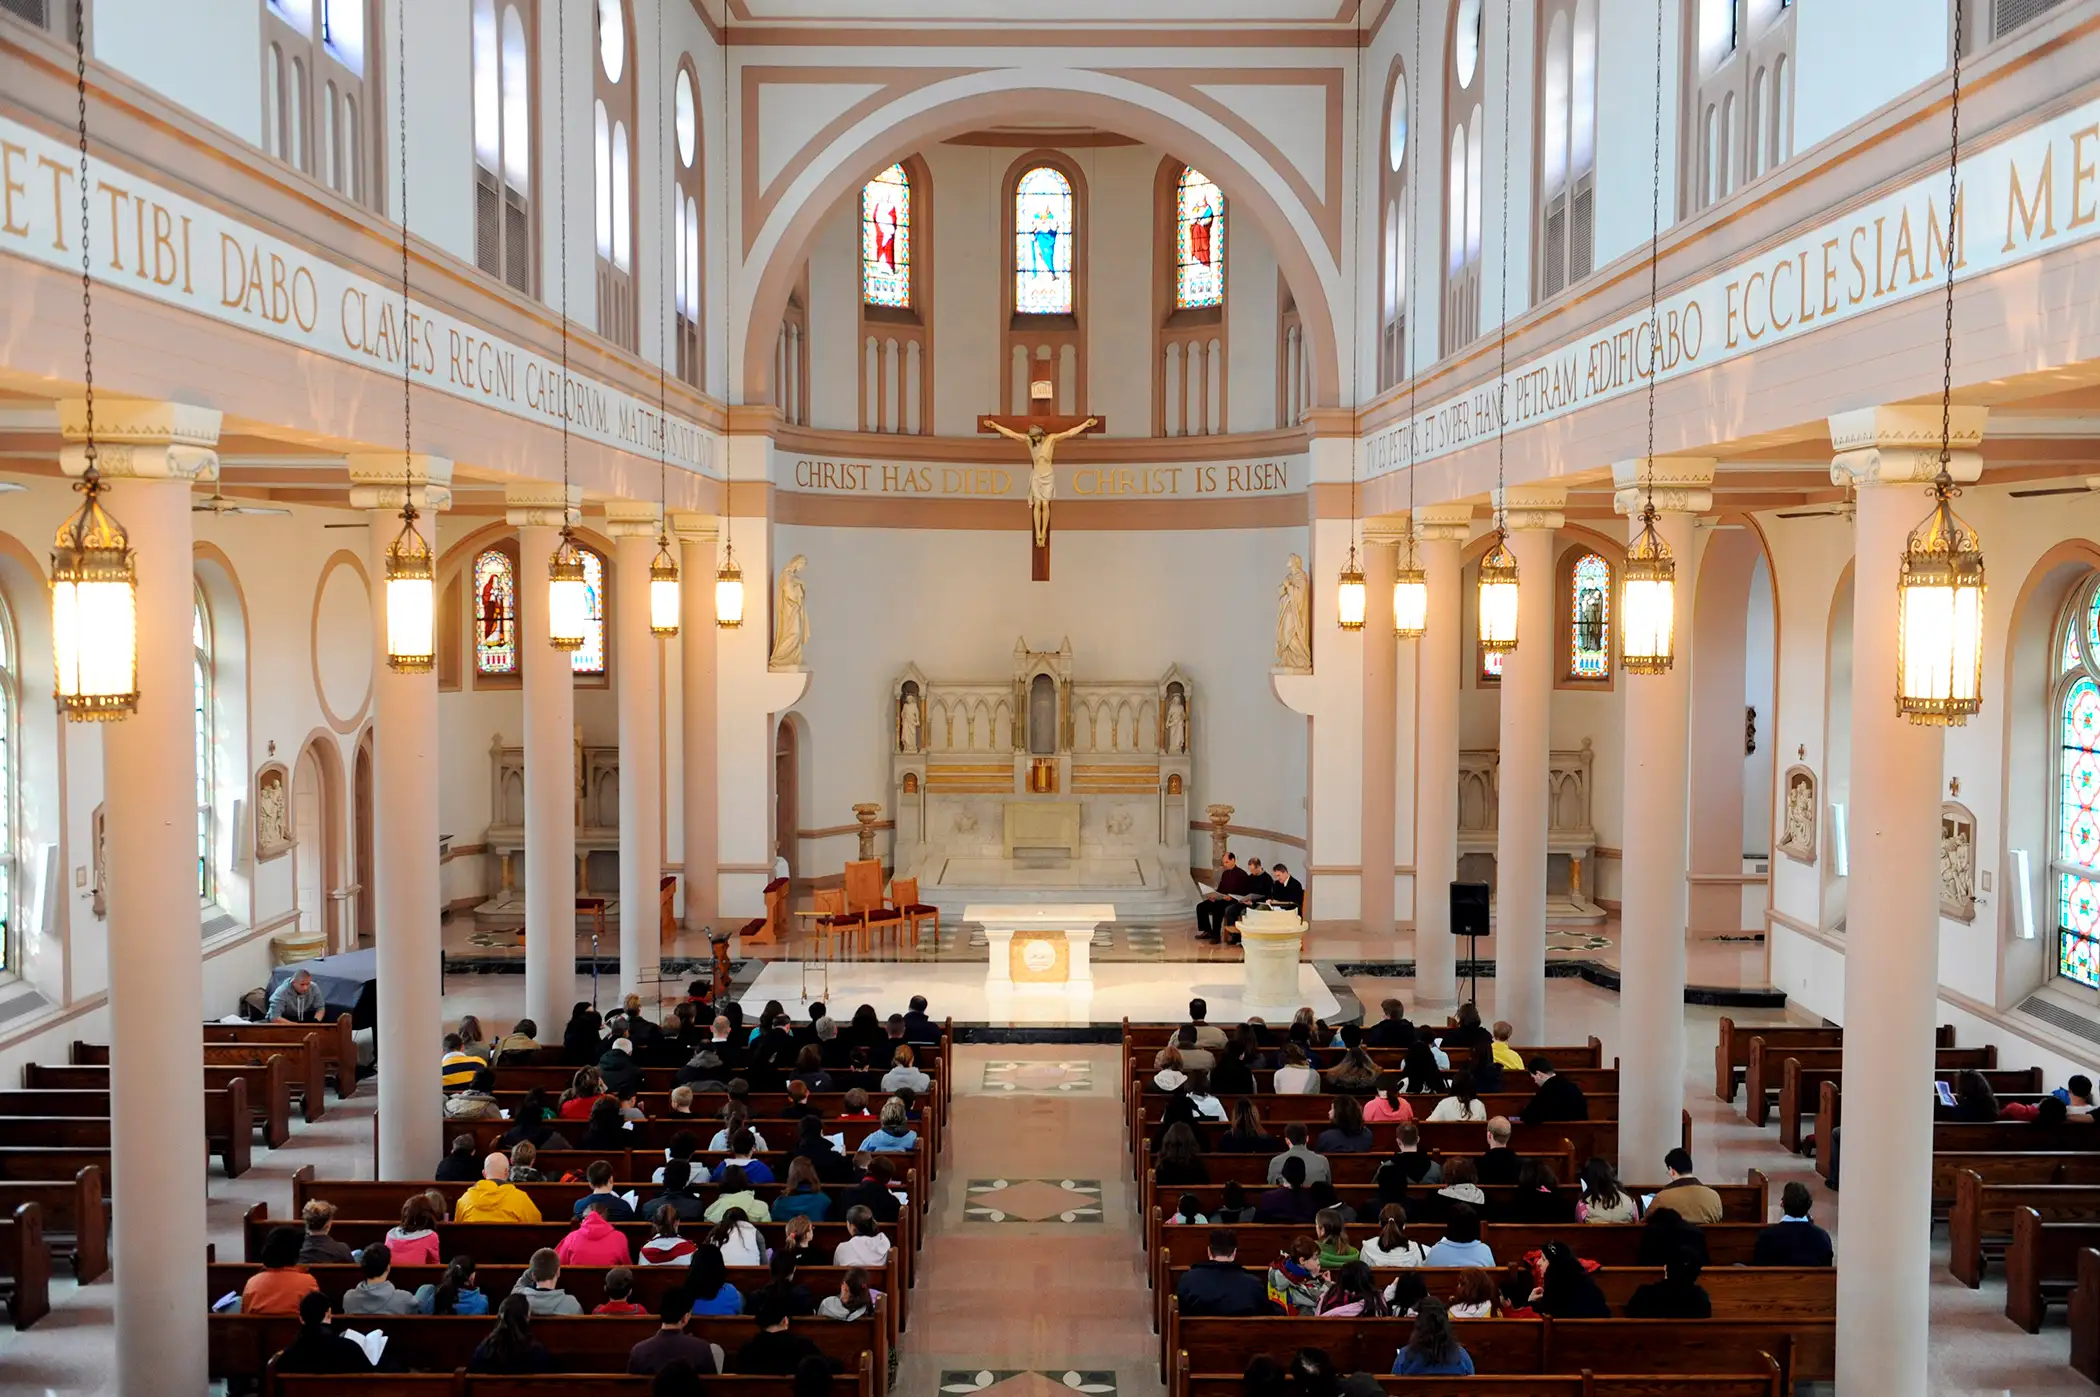 People gather during a Catholic service at St. Peter's Church in Washington DC, USA 10 April 2009.